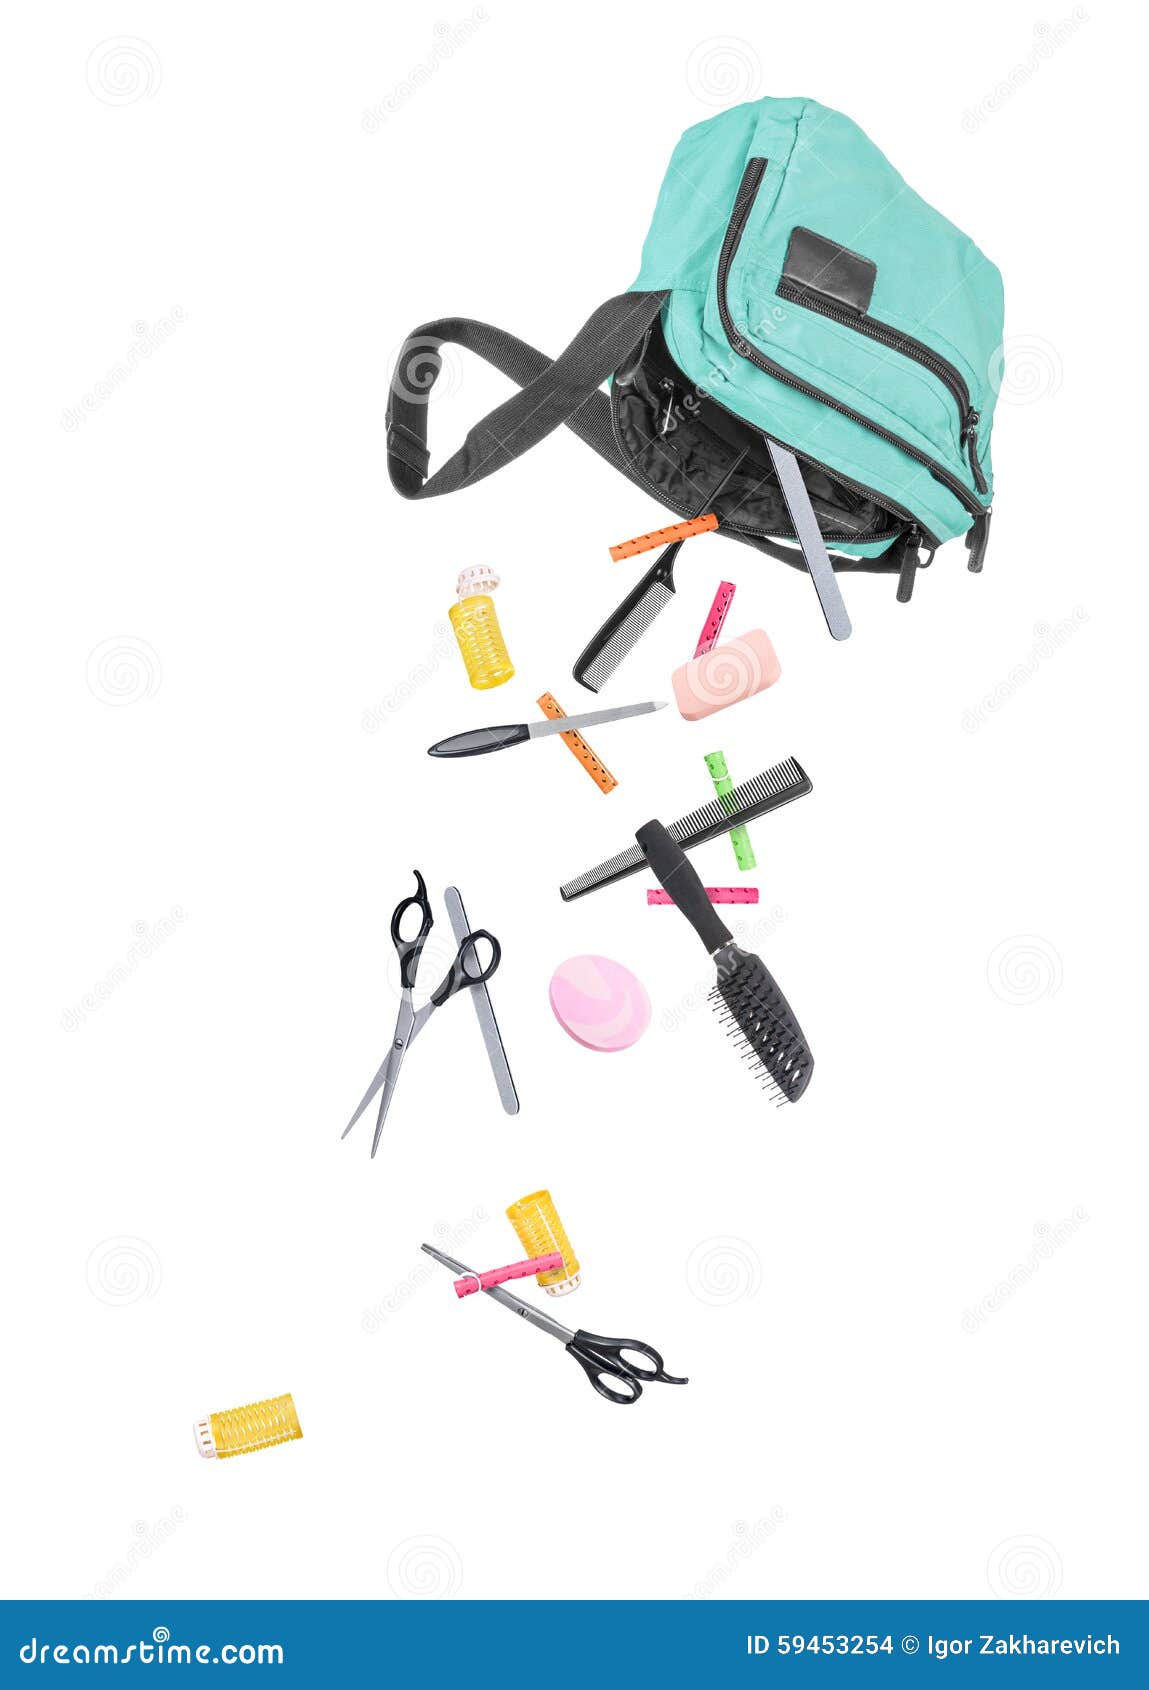 Tools for Beauty Salon Falling Out of the Bag Stock Photo - Image of  hairdresser, expertise: 59453254